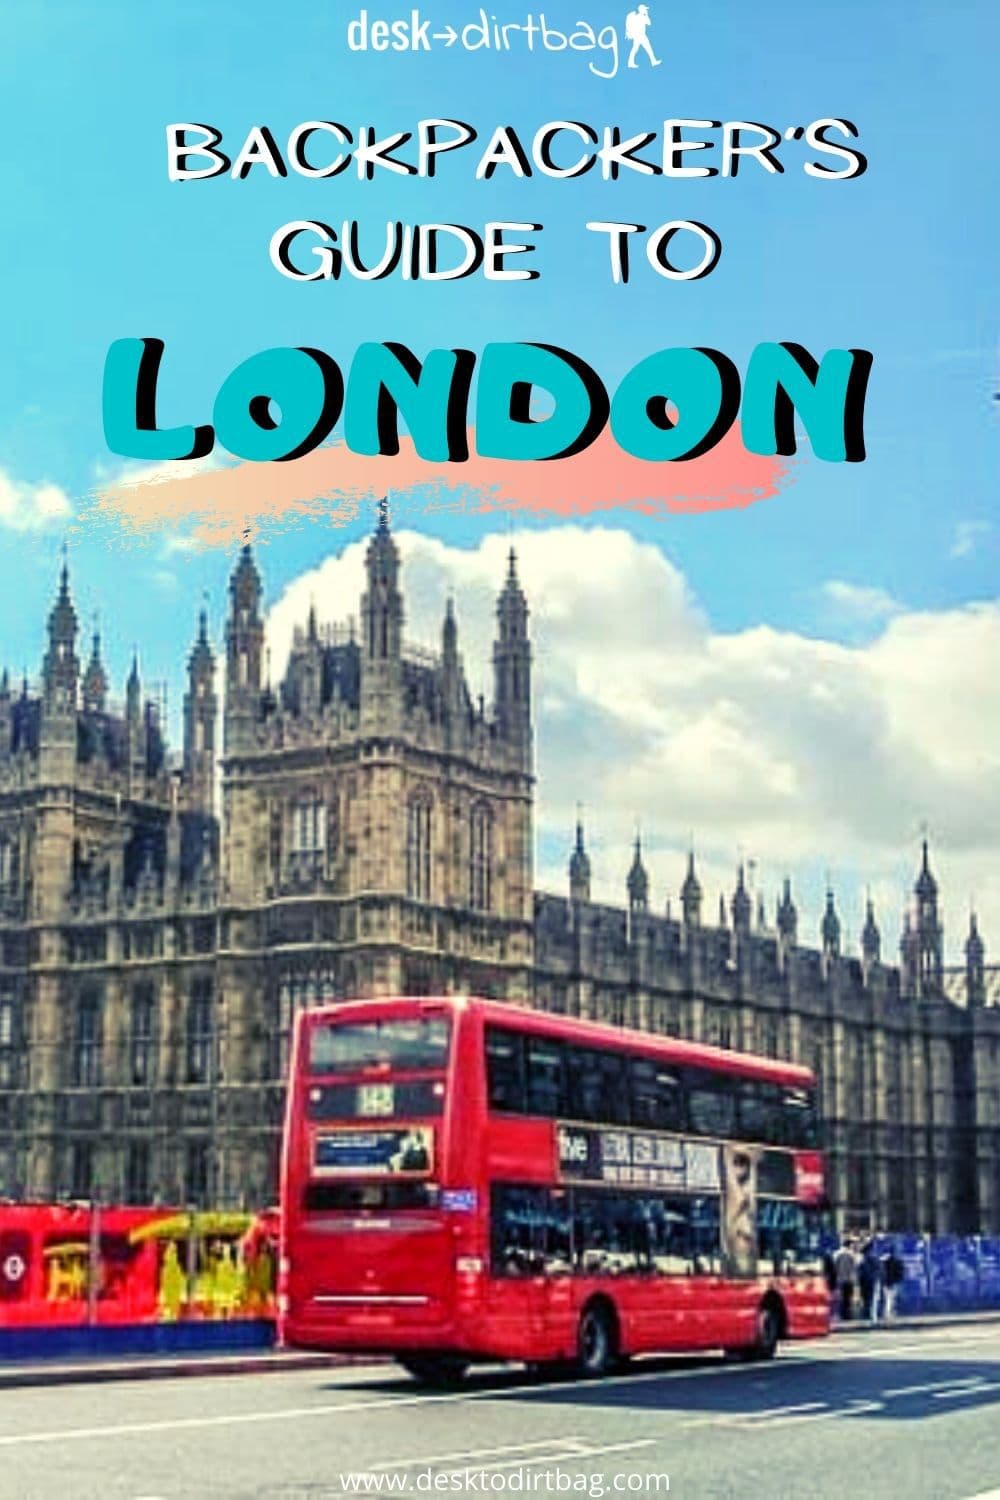 The Backpacker’s Guide to London travel